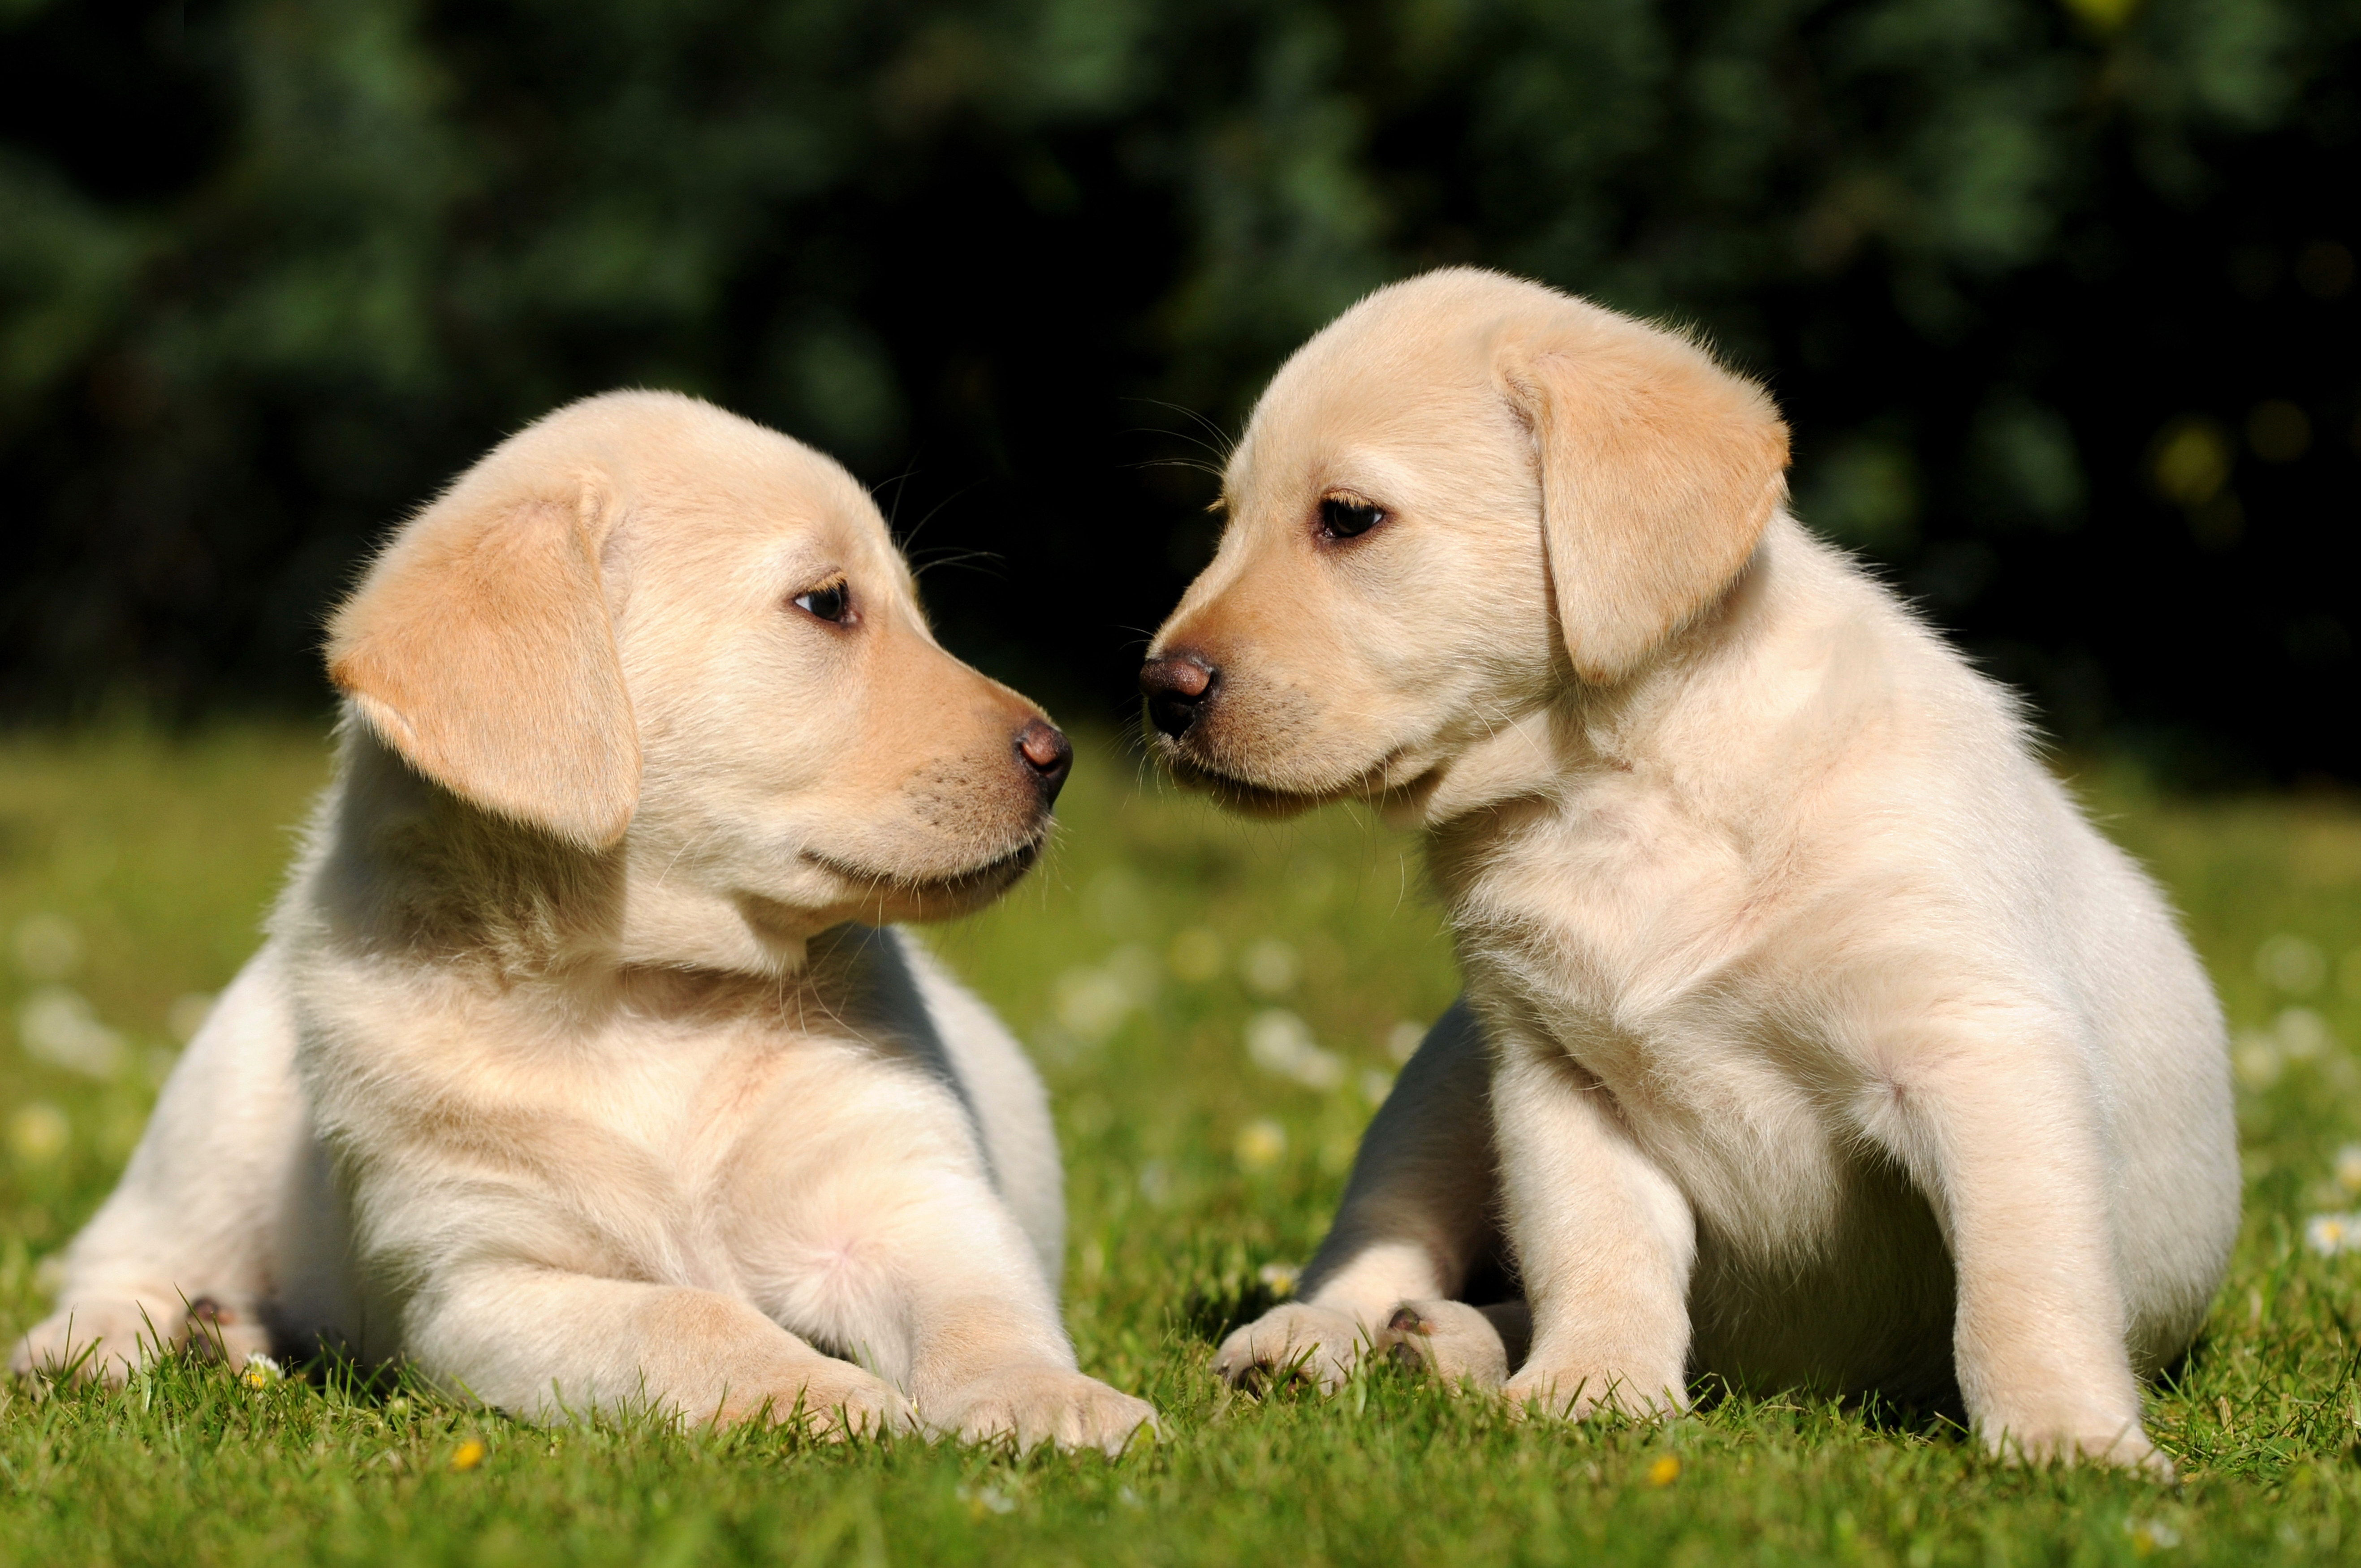 137206 Screensavers and Wallpapers Puppies for phone. Download animals, grass, puppies, brothers pictures for free